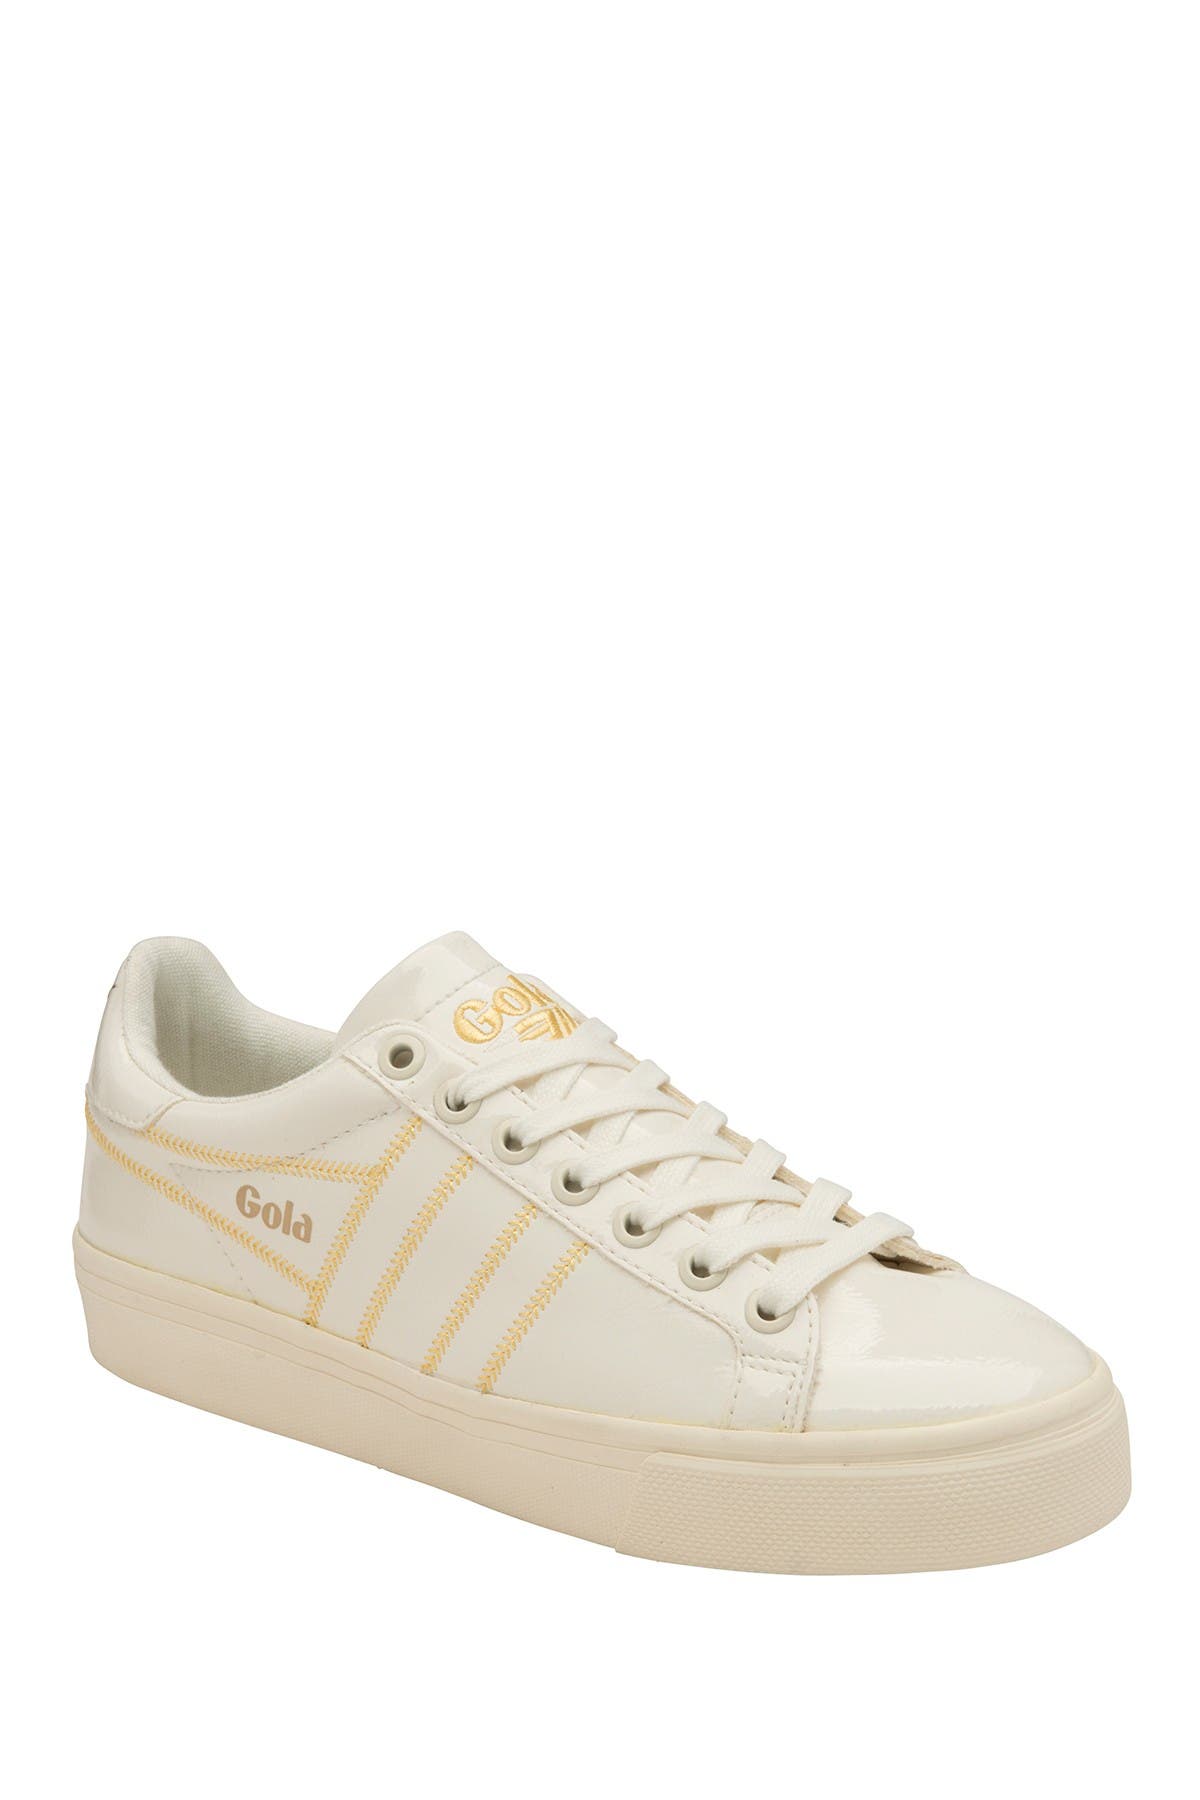 gola orchid sneakers